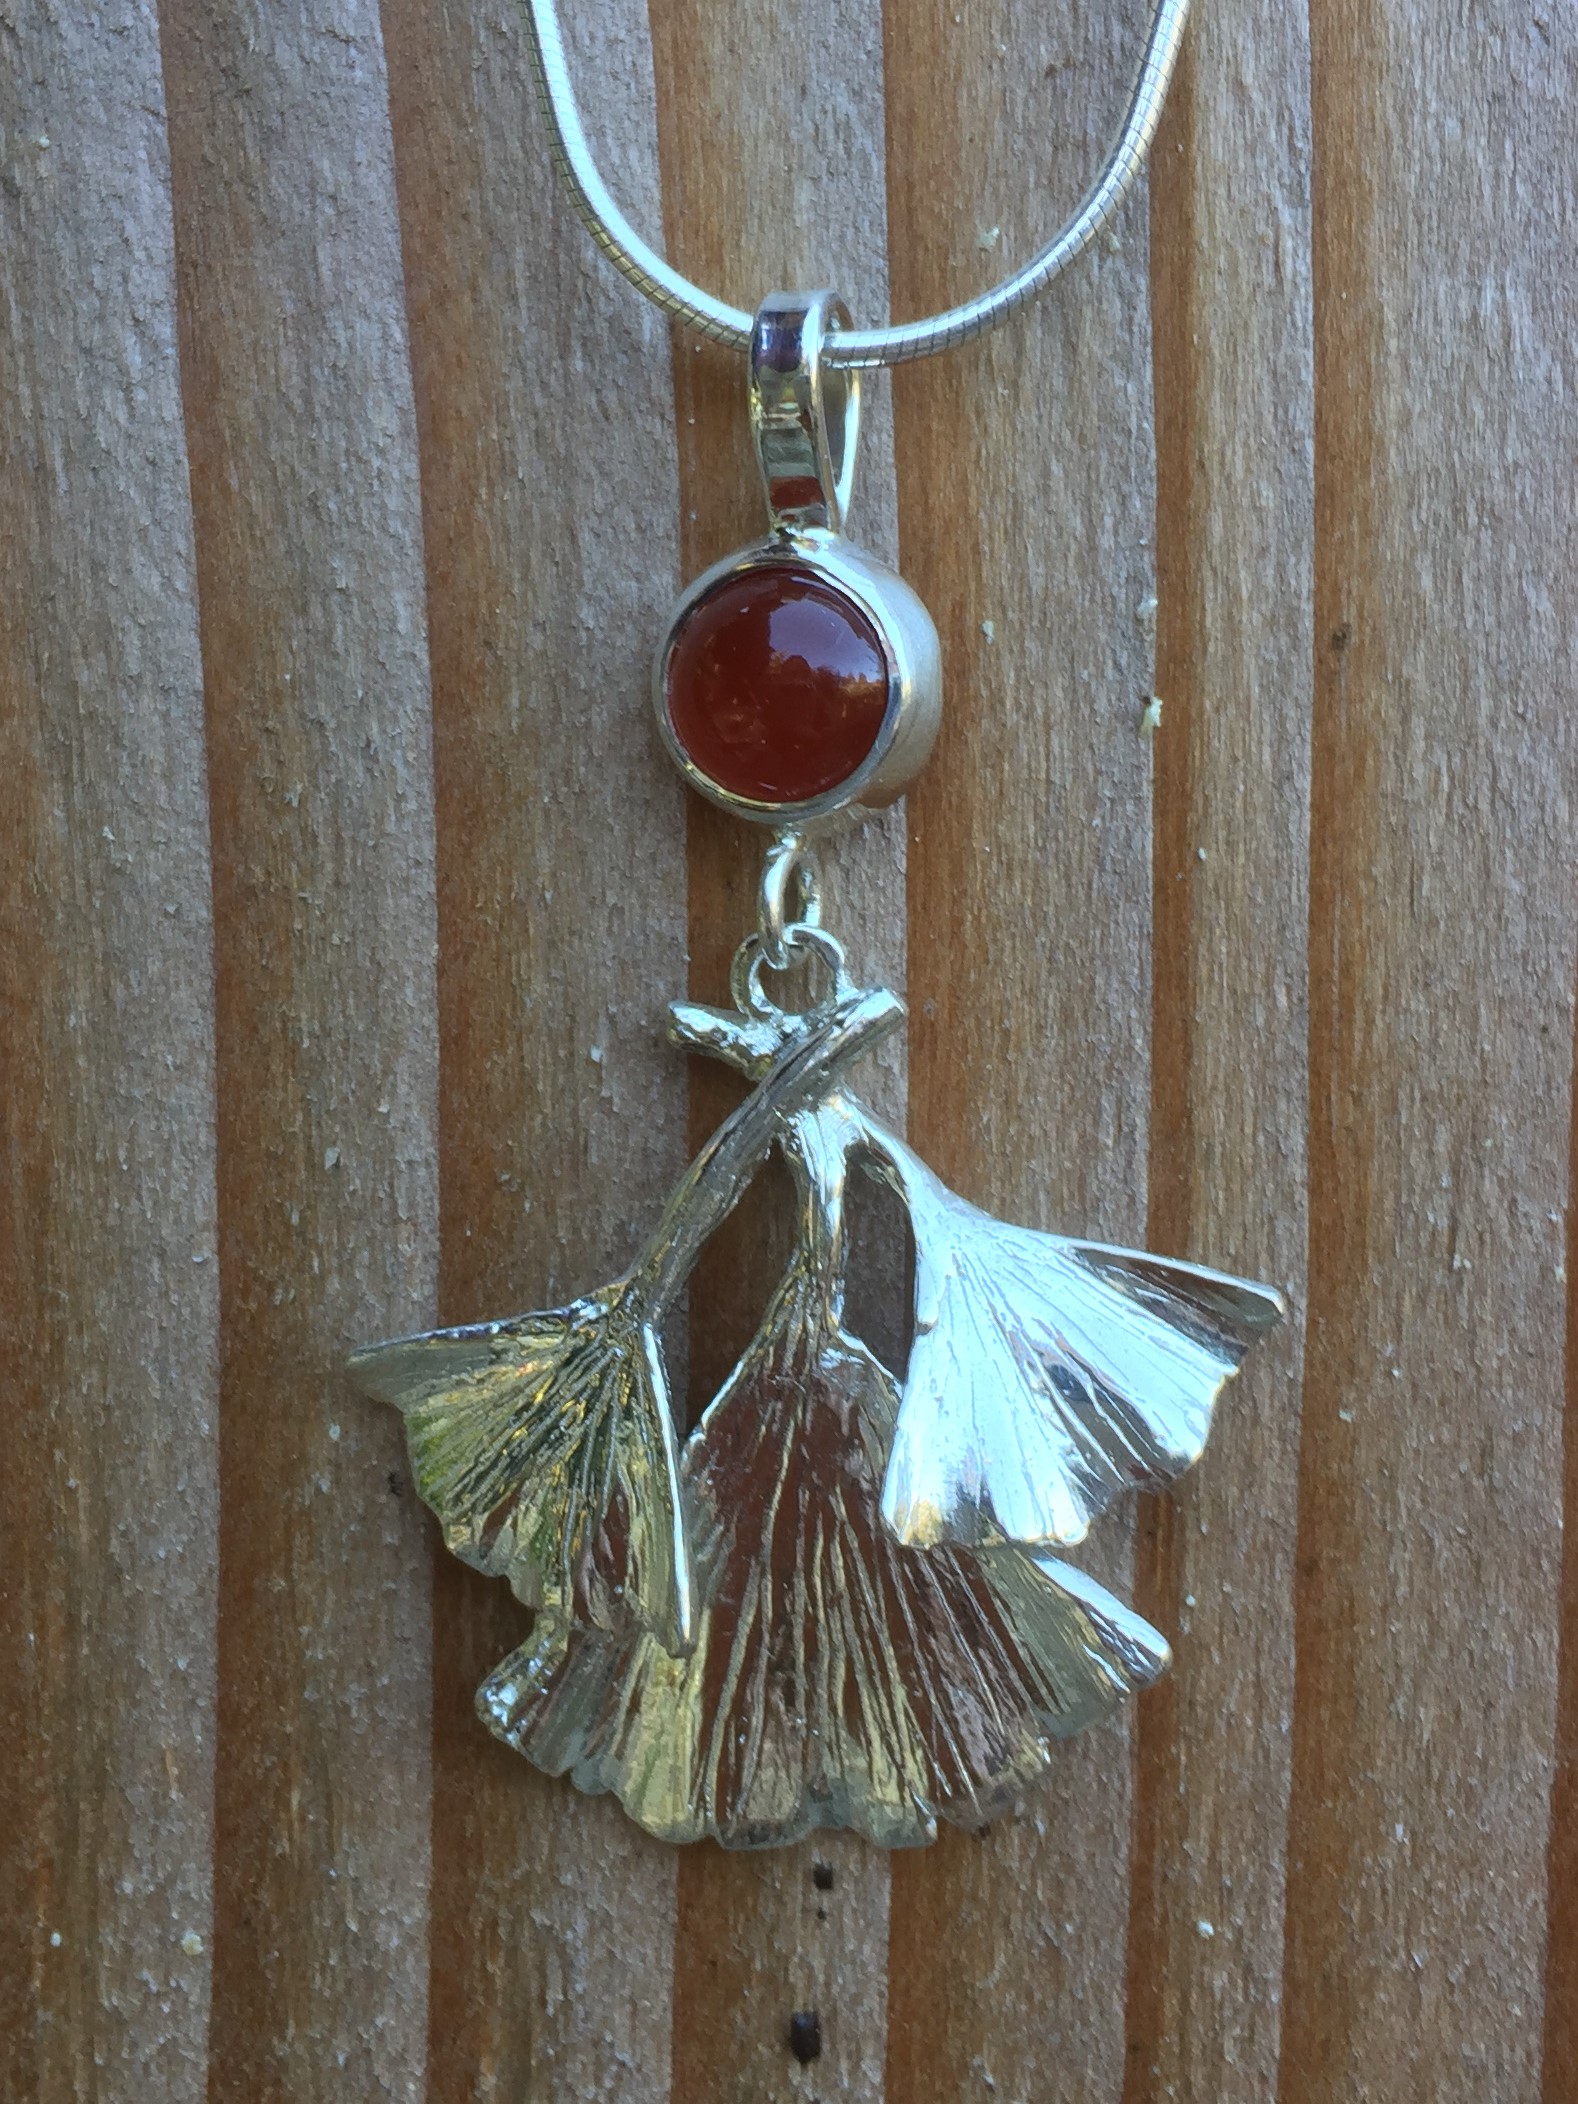 Zoom in on Red carnelian cabochon stone and silver gingko tree leaves necklace pendant